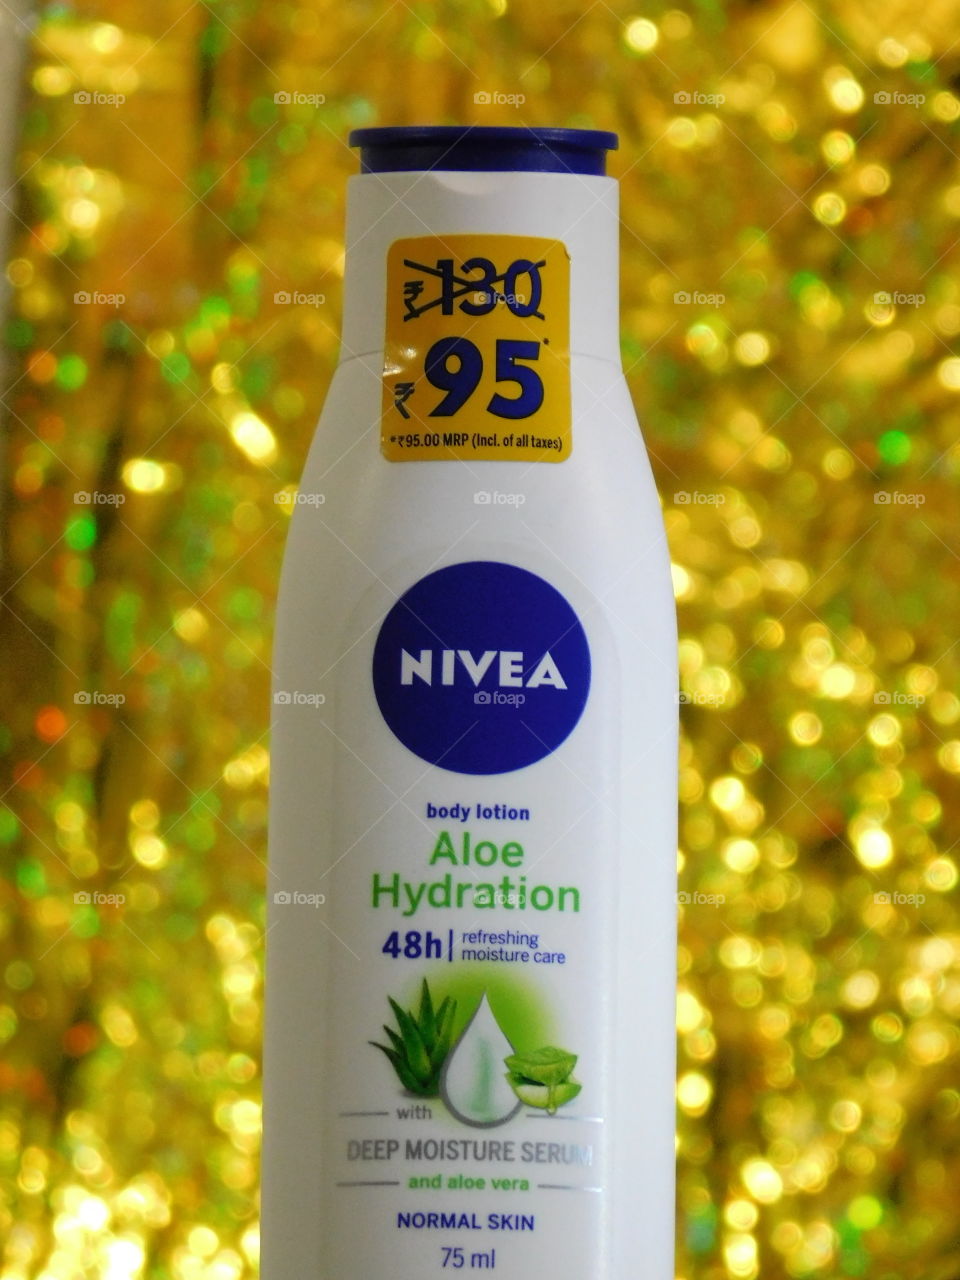 NIVEA _ Nivea Aloe Hydration body lotion with deep moisture serum and aloe Vera for normal skin .it gives your skin fast absorbing and refreshing moisturization and make it noticably smoother for the 48 hours.